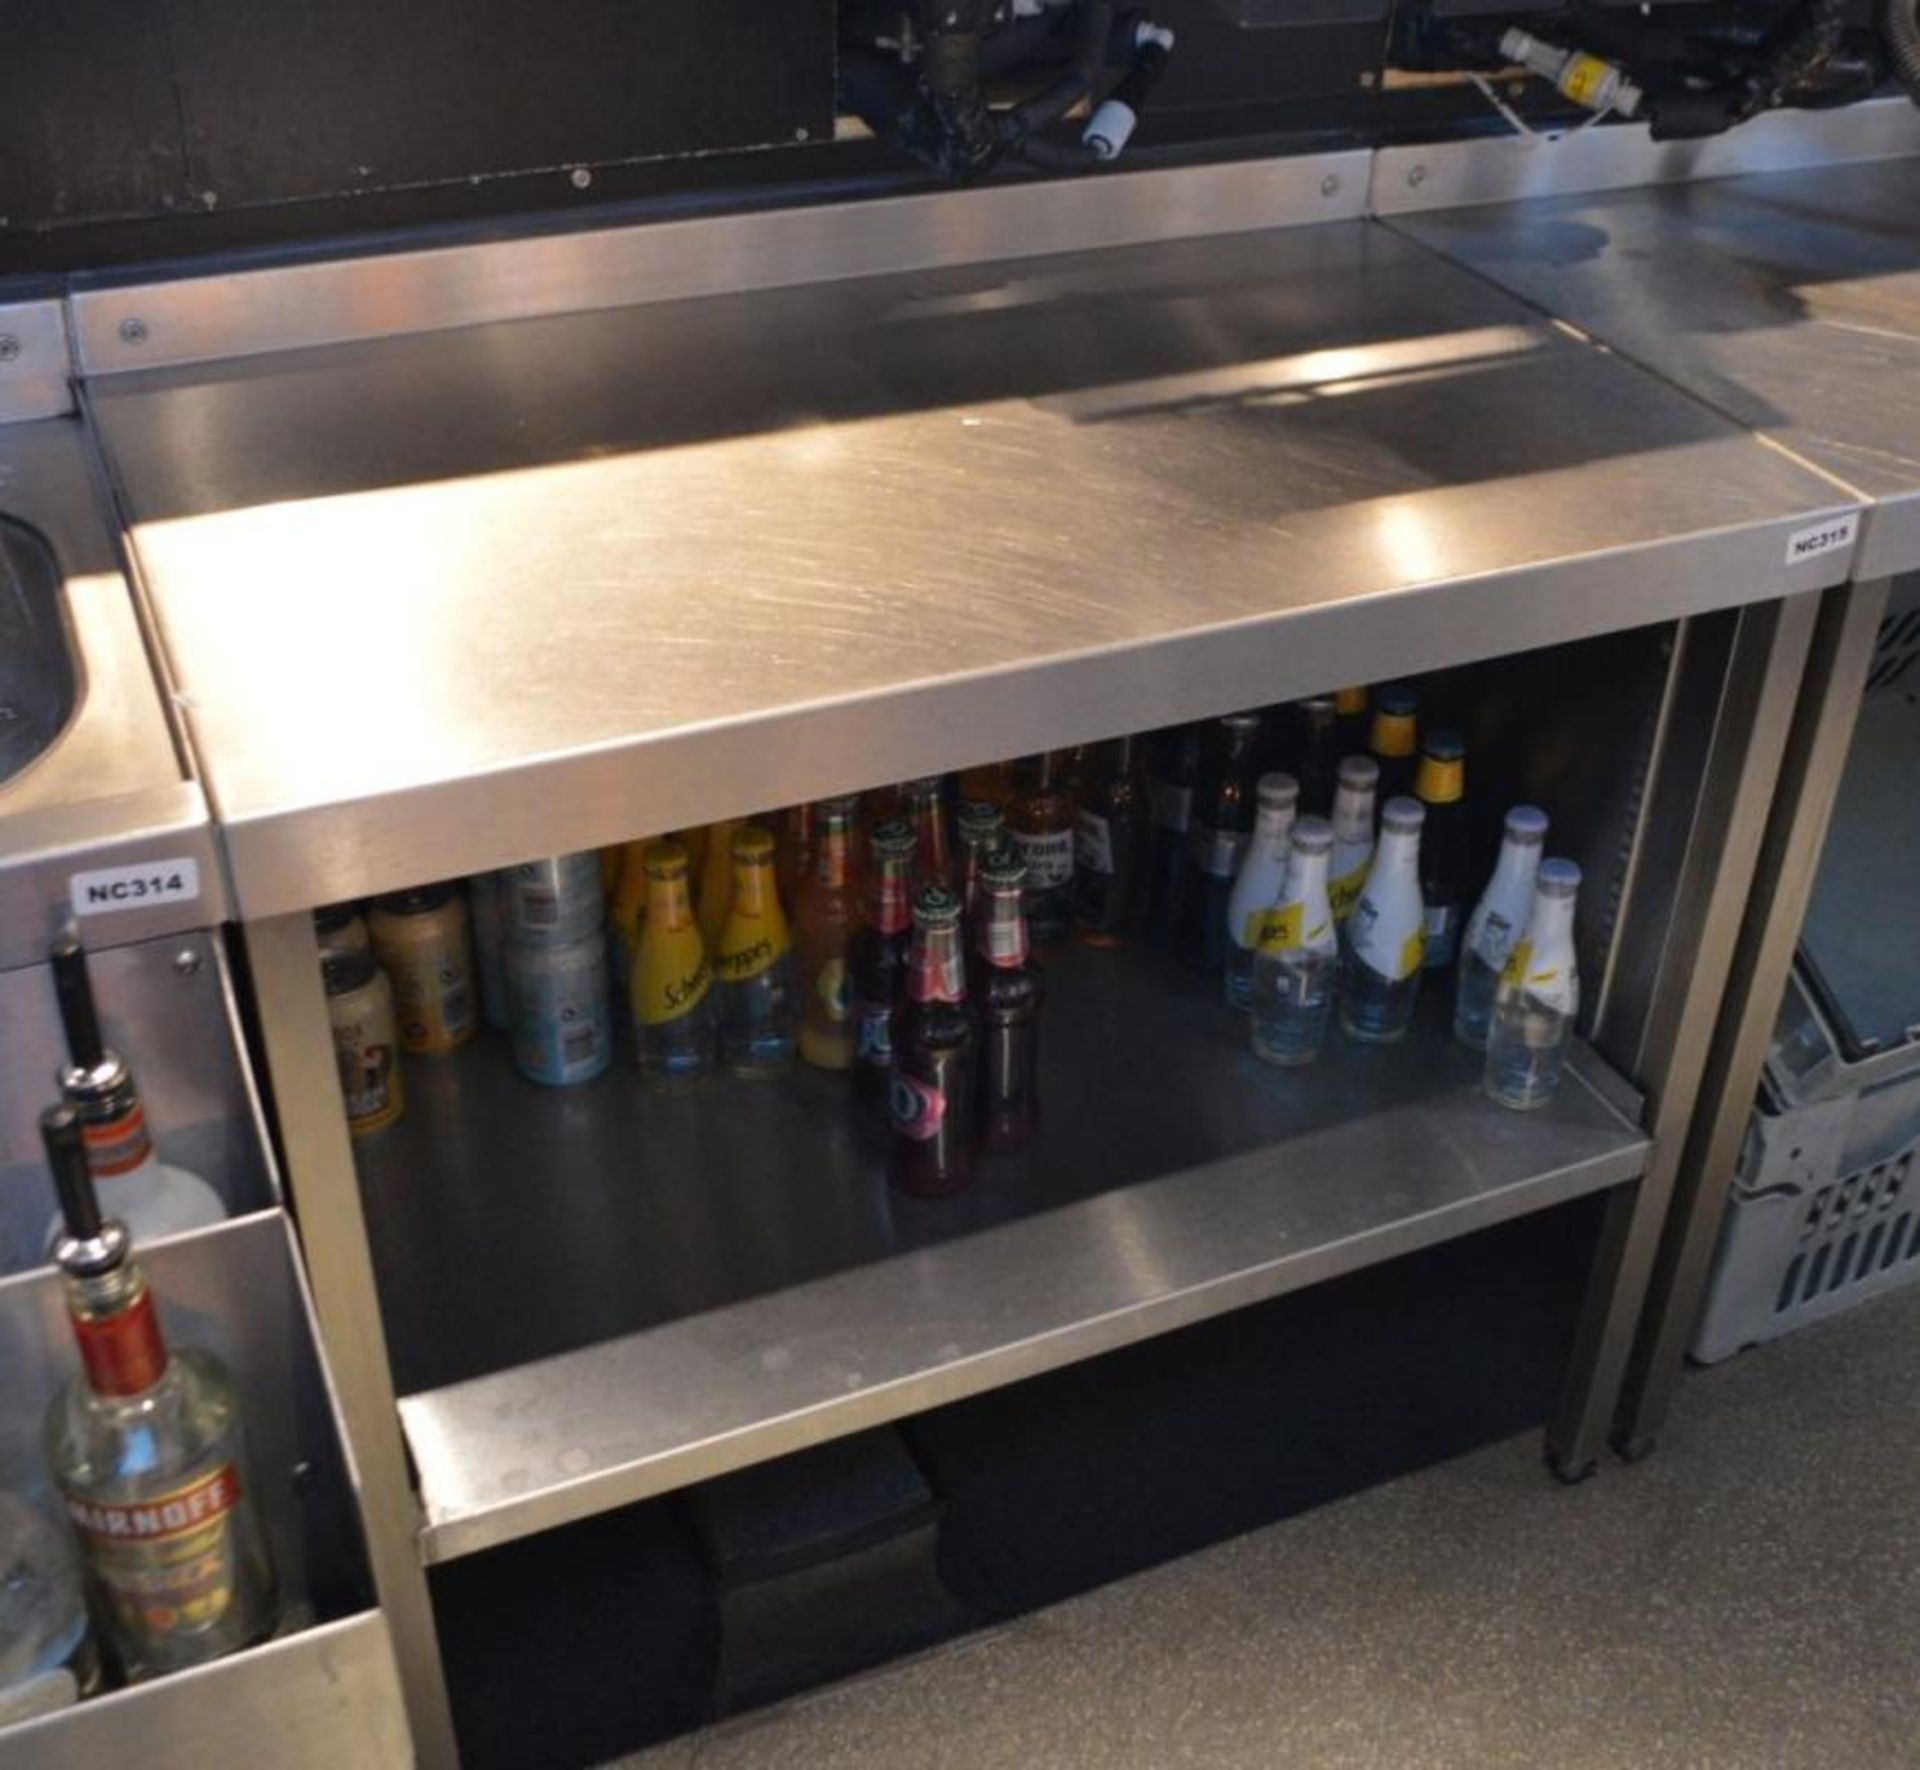 1 x Stainless Steel Back Bar Prep Table With Adjustable Shelves - H81 x W90 x D58 cms - Ref - Image 2 of 2